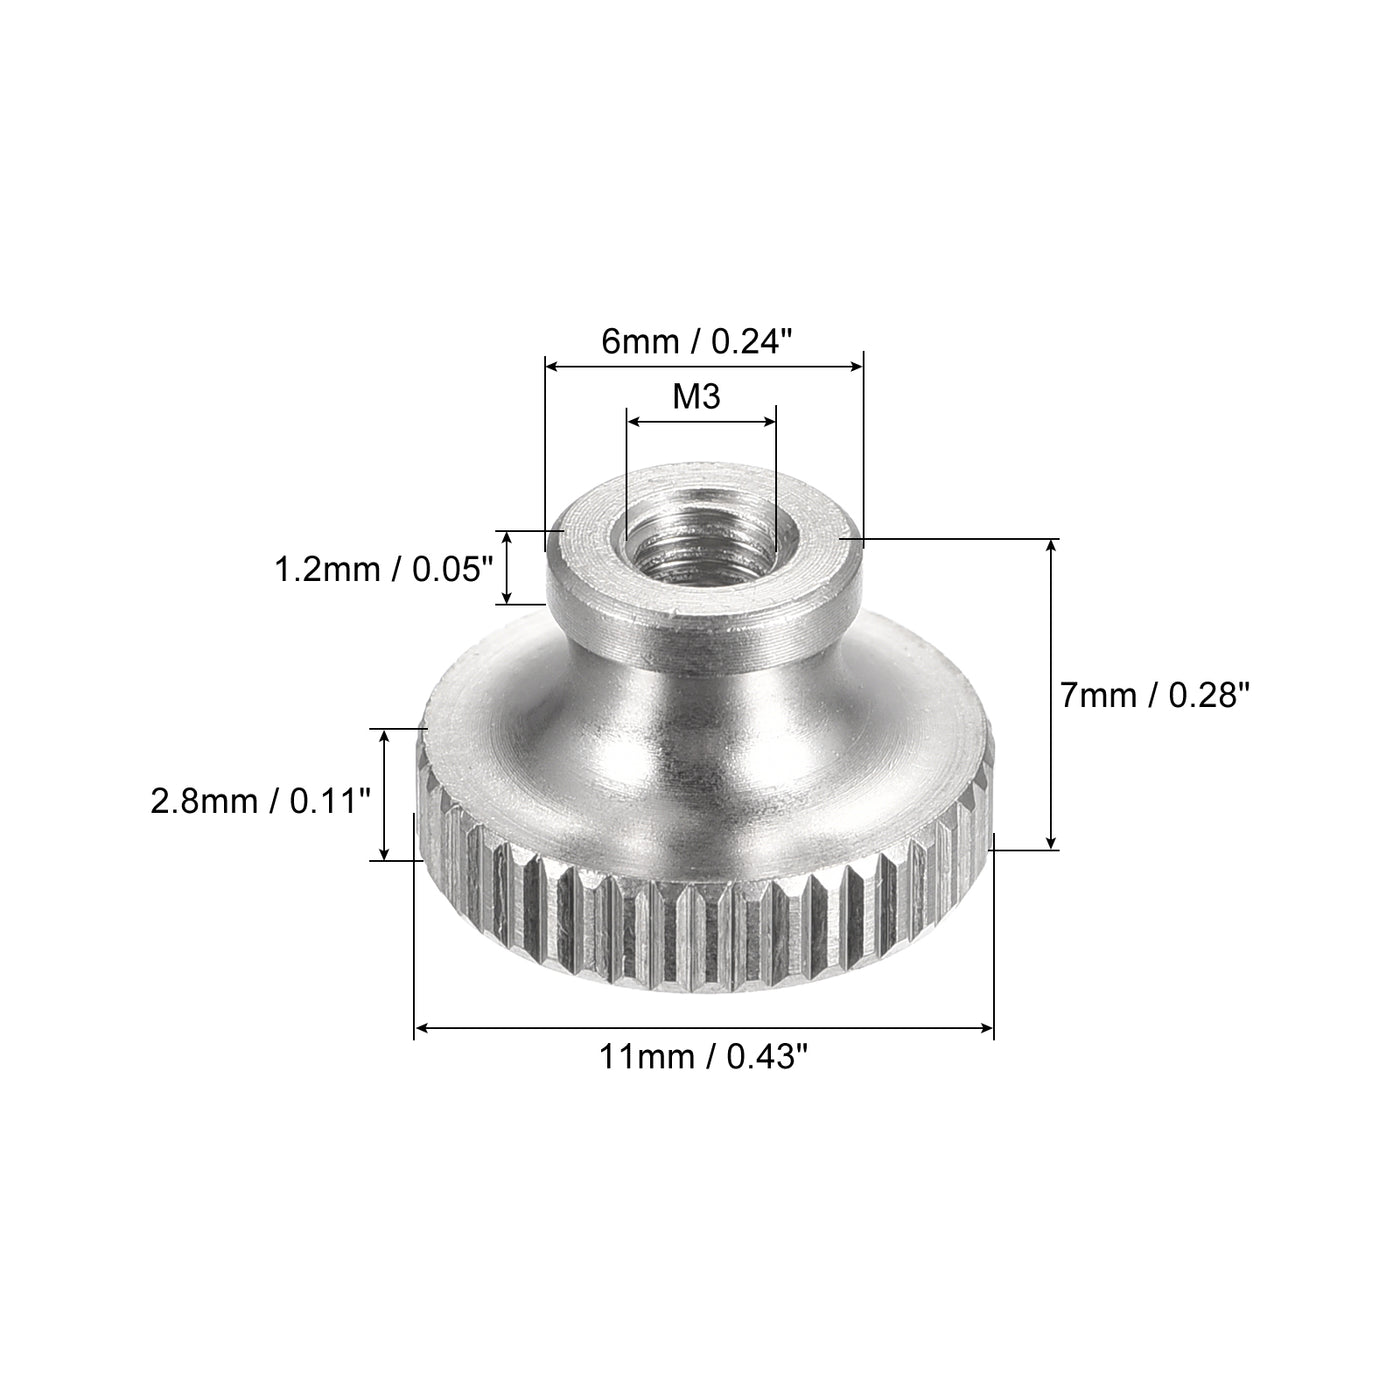 uxcell Uxcell Knurled Thumb Nuts, 5pcs M3 x D11mm x H7mm 304 Stainless Steel Blind Hole Nuts